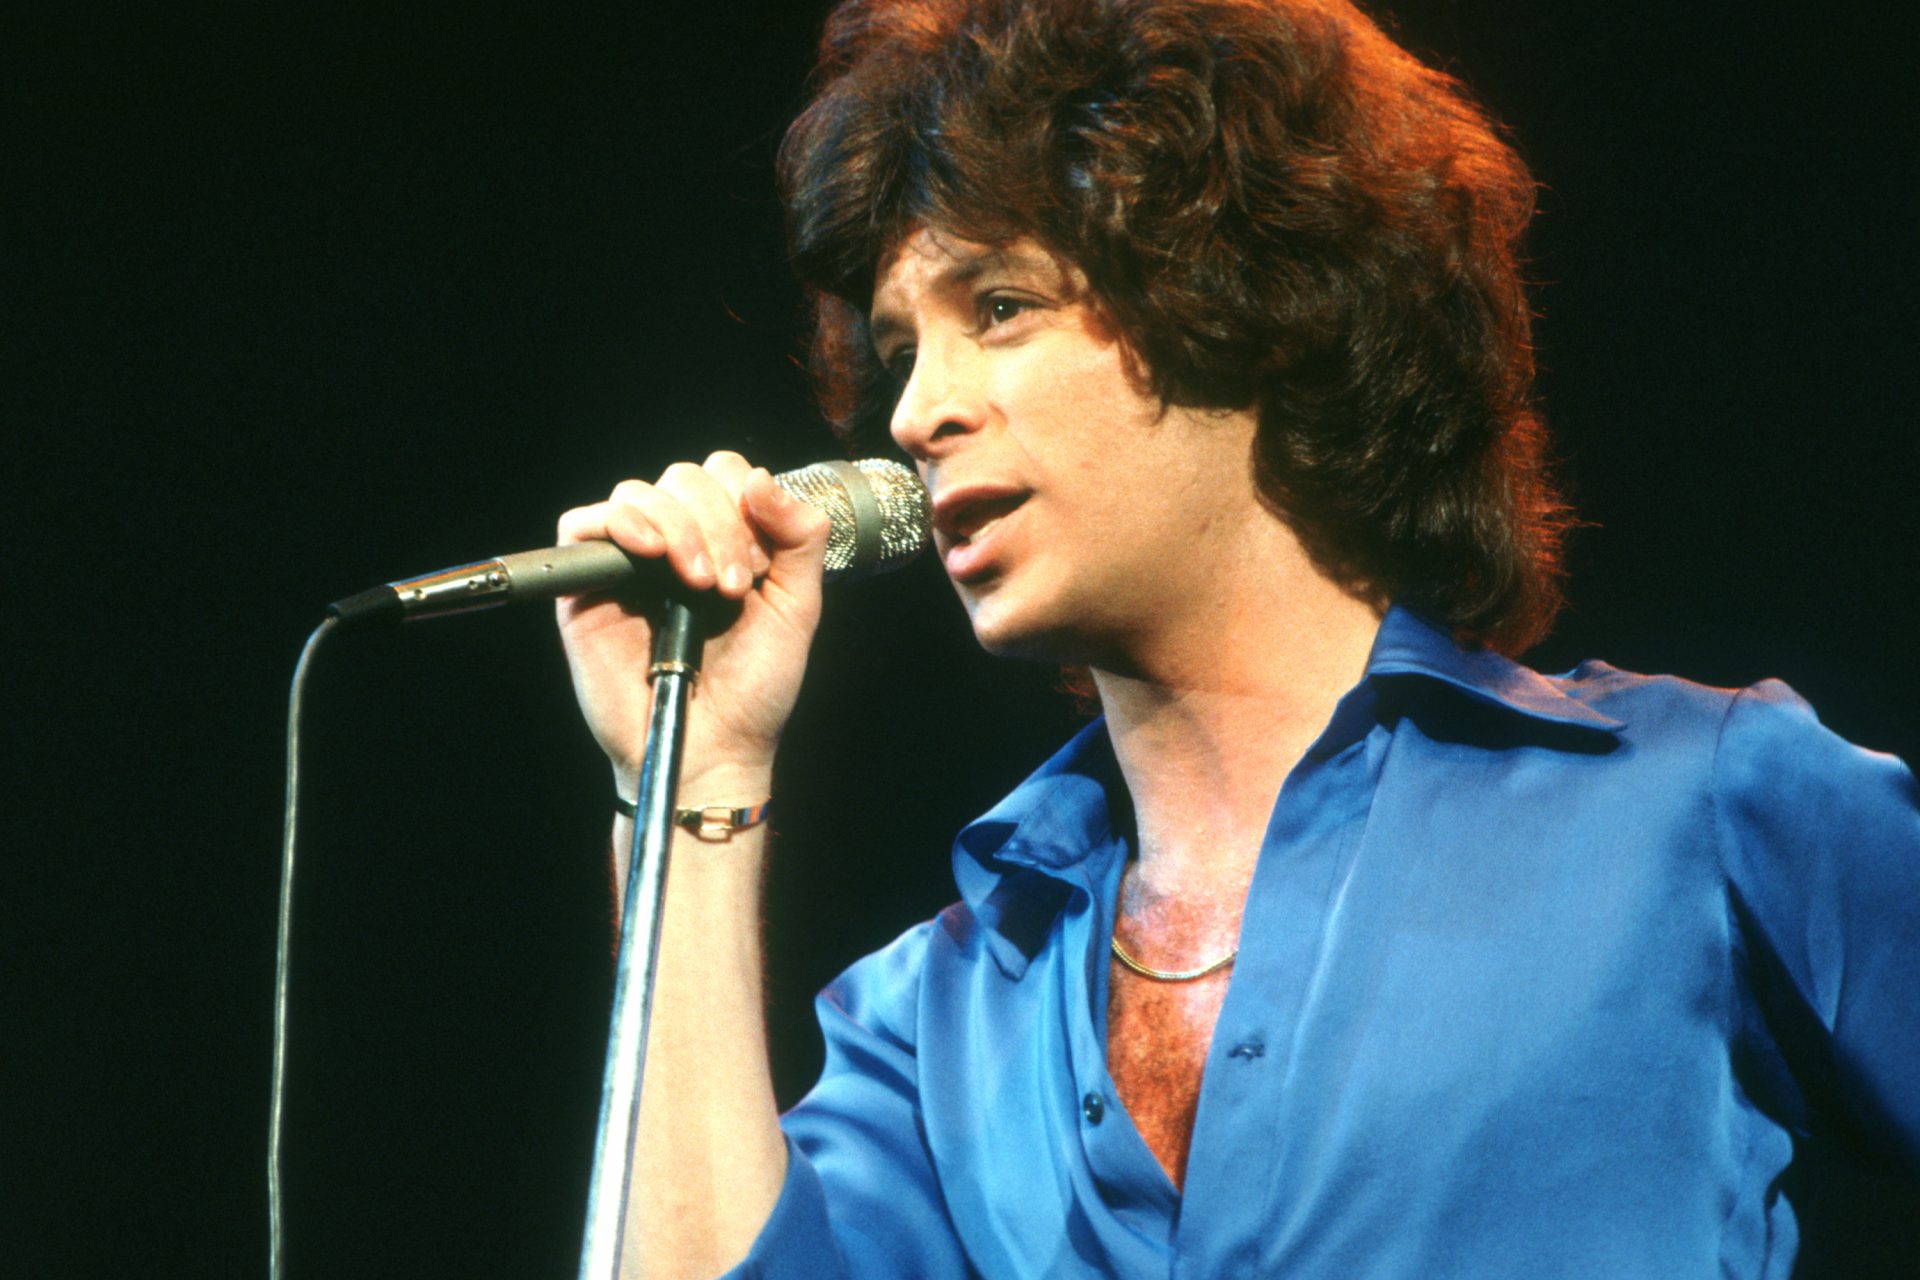 The death of 'Hungry Eyes' singer Eric Carmen